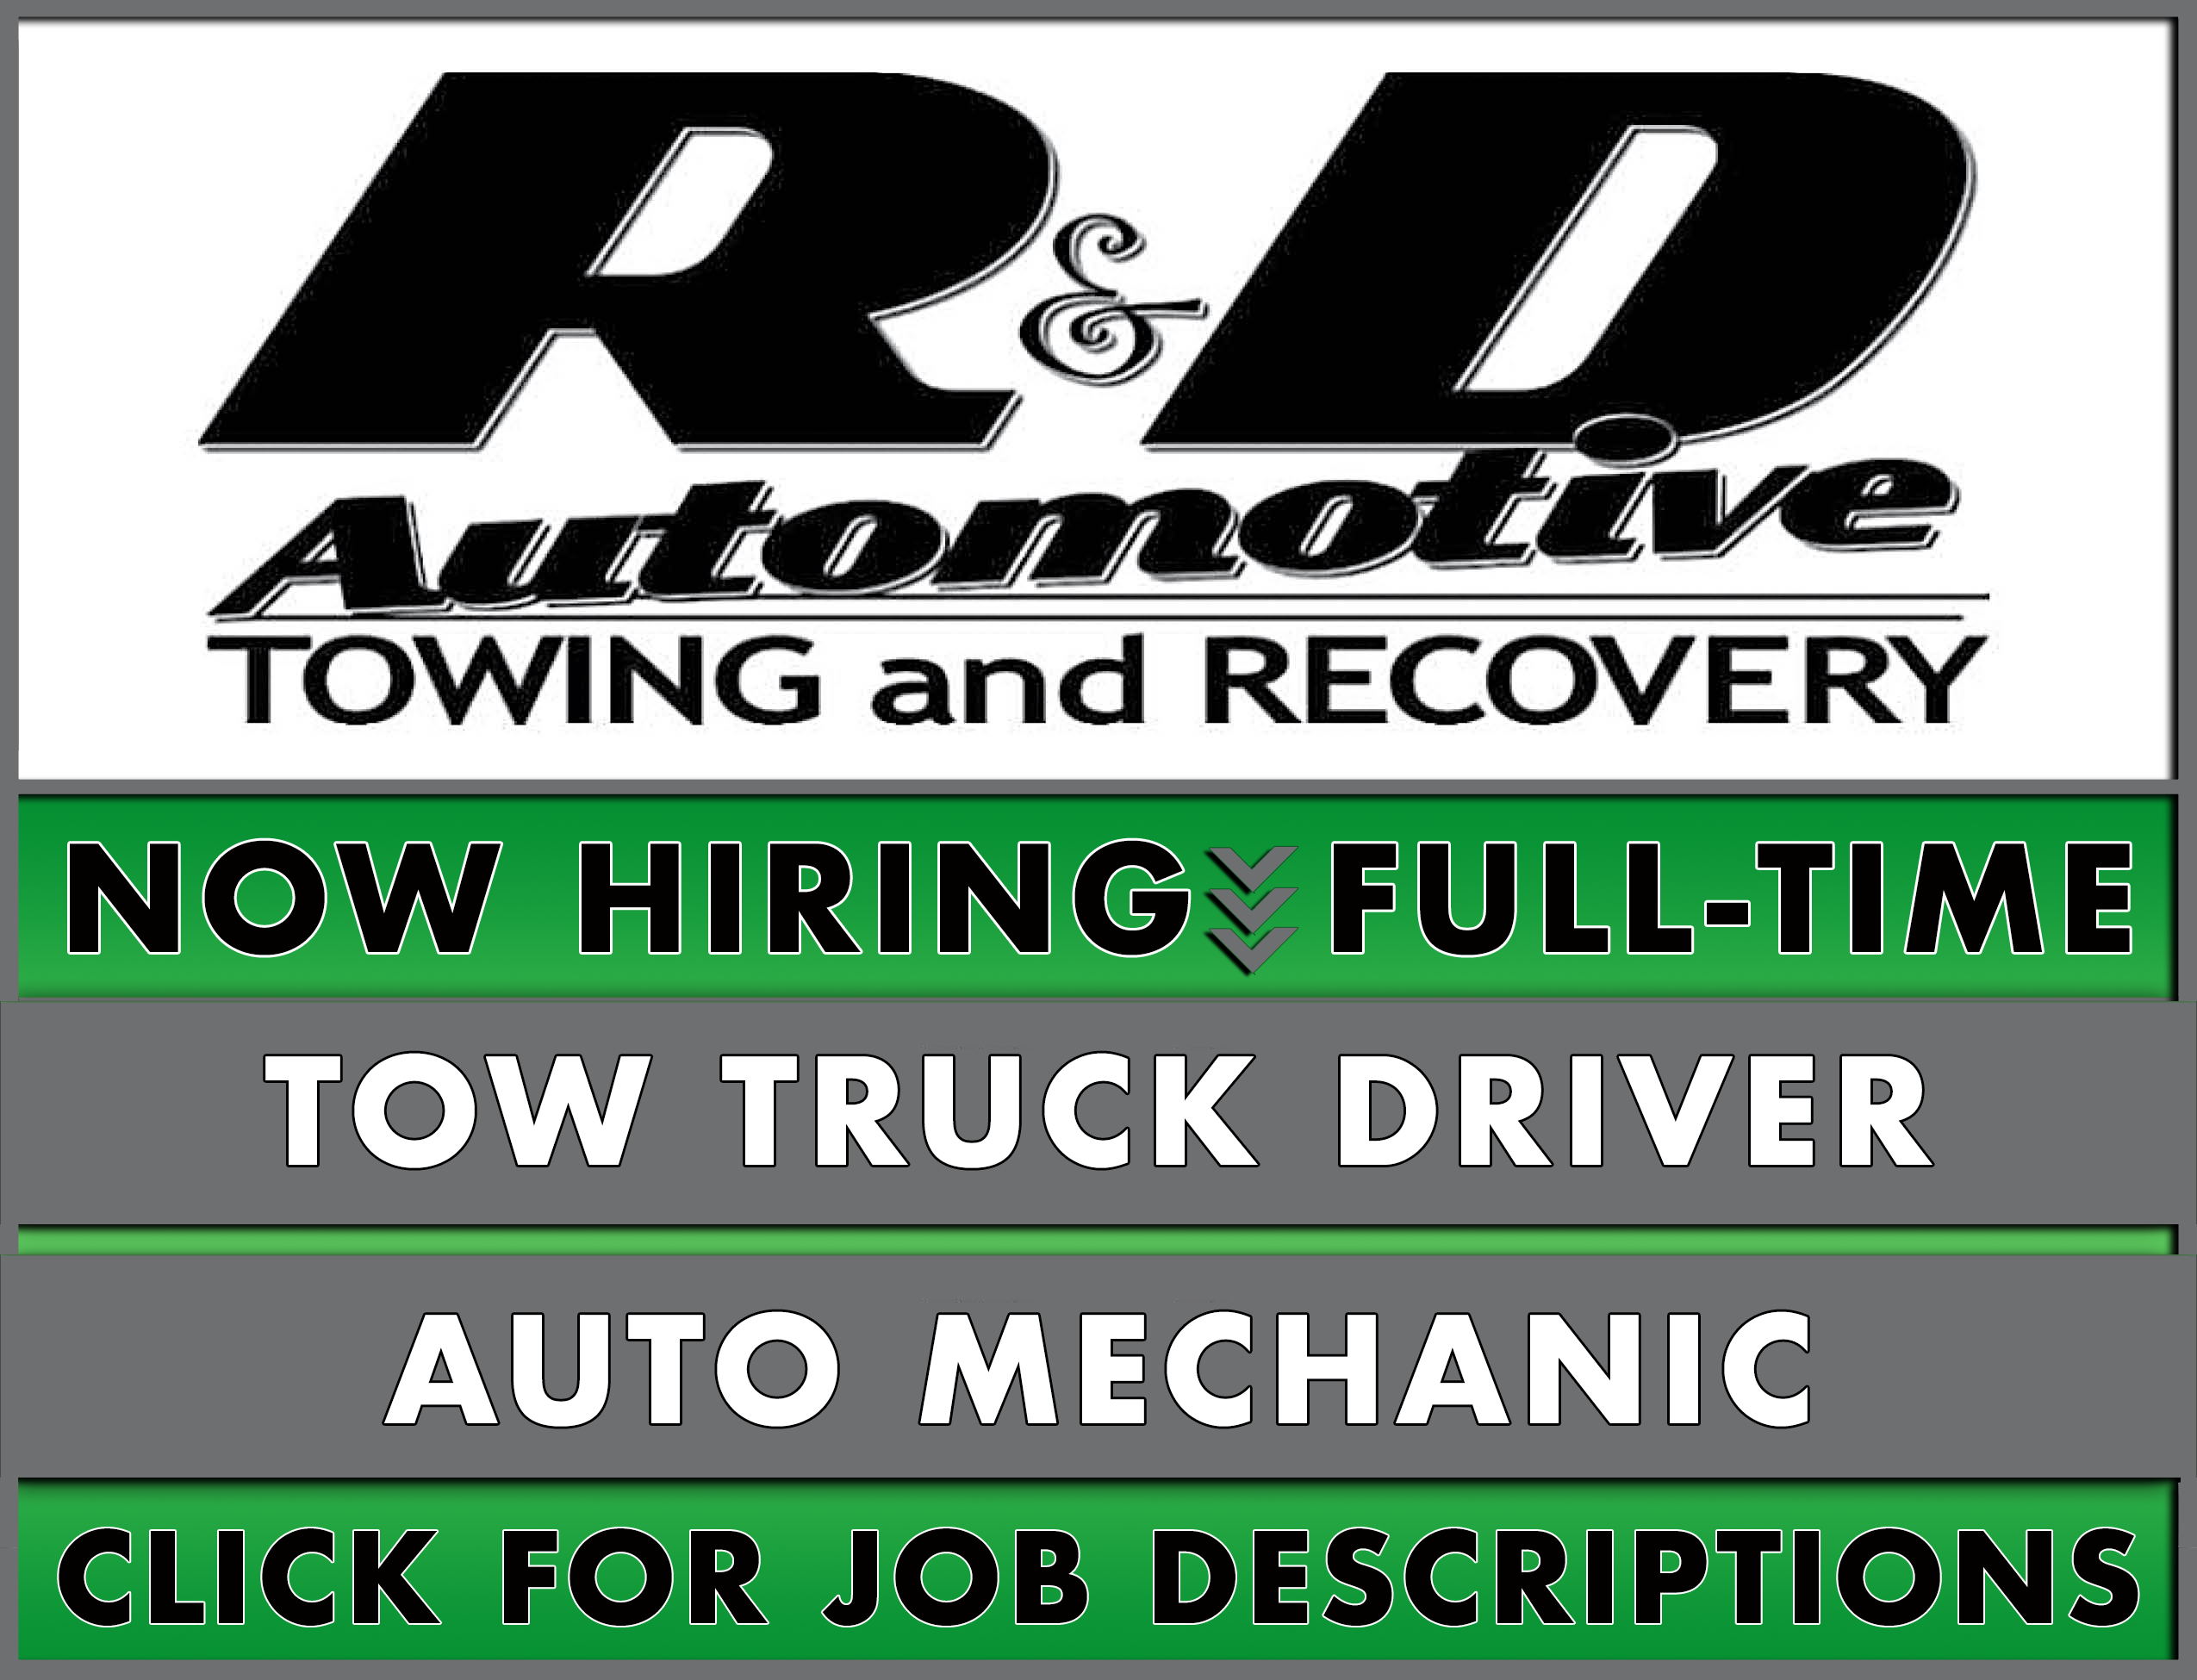 R&D Automotive Towing and Recovery Help Wanted Ad